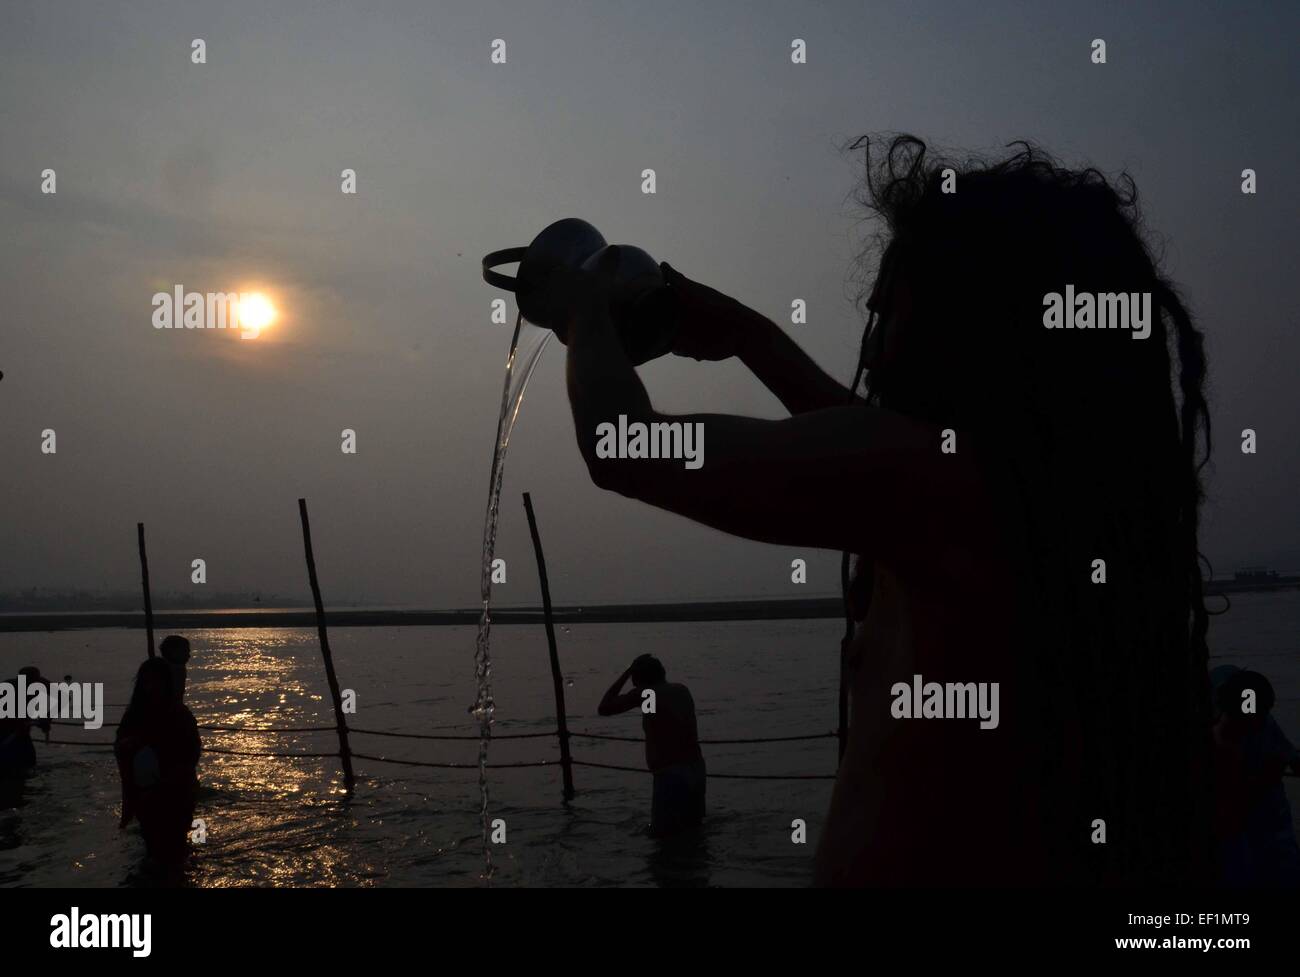 Allahabad: A Naga Sahu offer prayer to sun during sunrise after taking holydip in water of Sangam on the occasion of 'Basant Panchami' during one month long Magh mela festival in allahabad on 24-01-2015. photo by prabhat kumar verma A Sadhu offers prayer after a holy dip in the waters of Sangam during the ' Basant Panchami', festival that highlights the coming of spring. © Prabhat Kumar Verma/Pacific Press/Alamy Live News Stock Photo